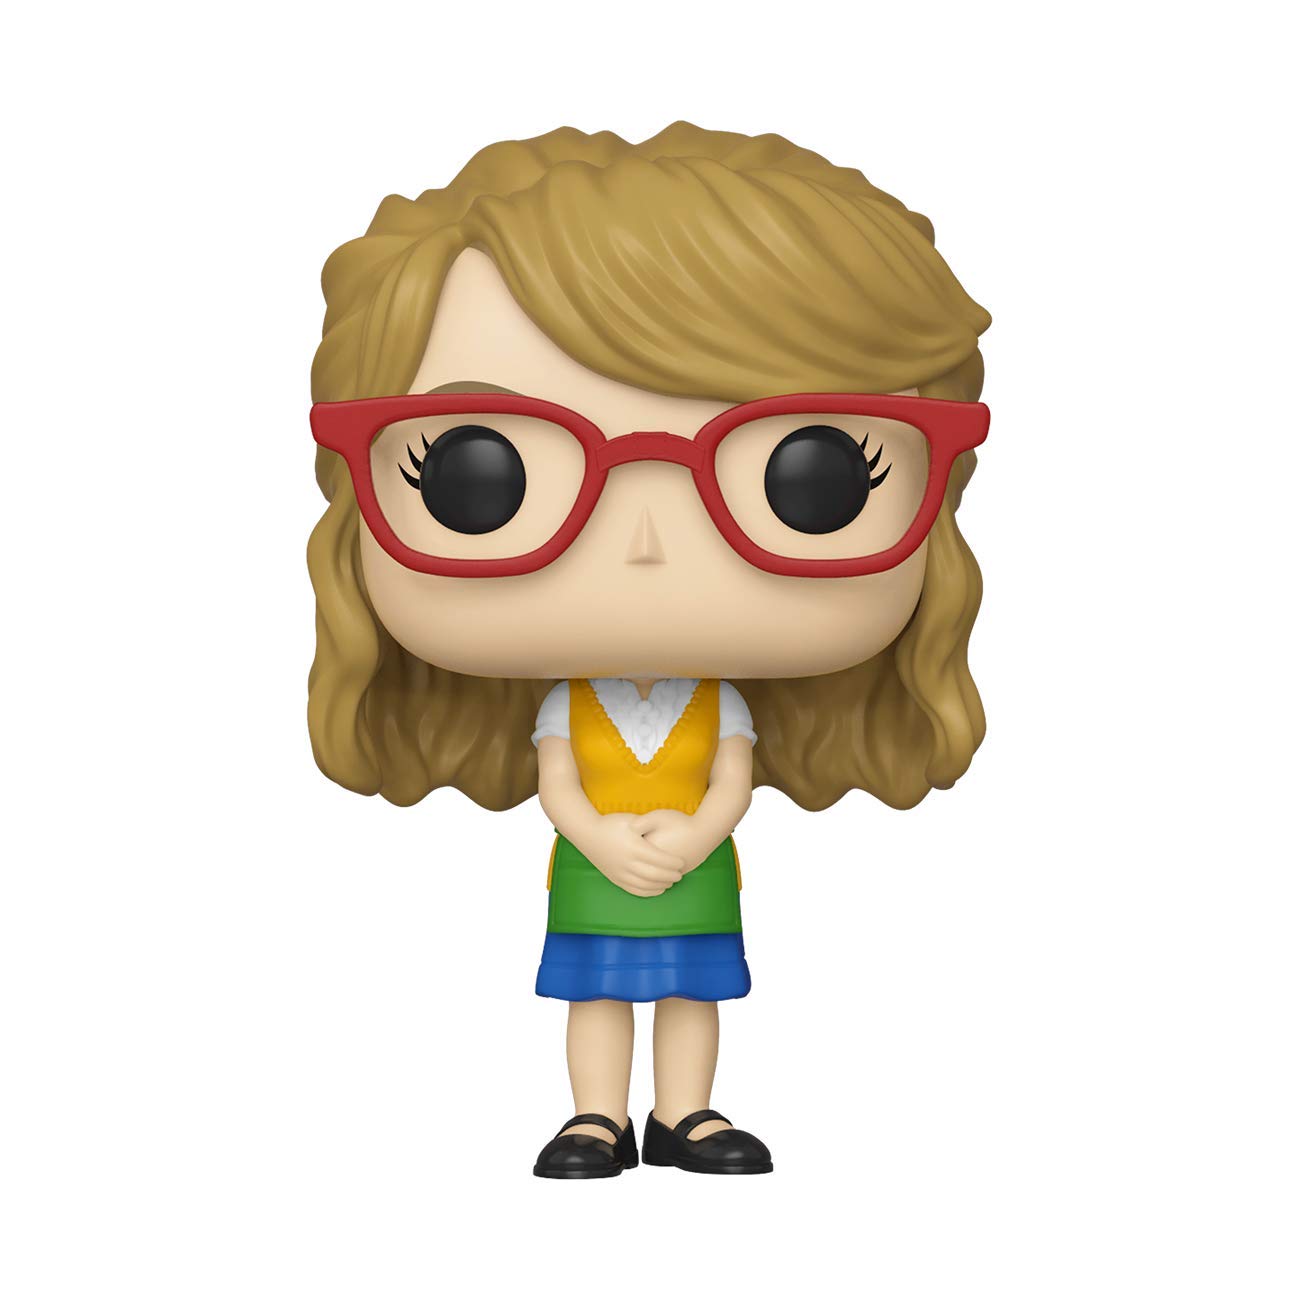 Pop! Television - The Big Bang Theory - Bernadette Rostenkowski - #783 - 0